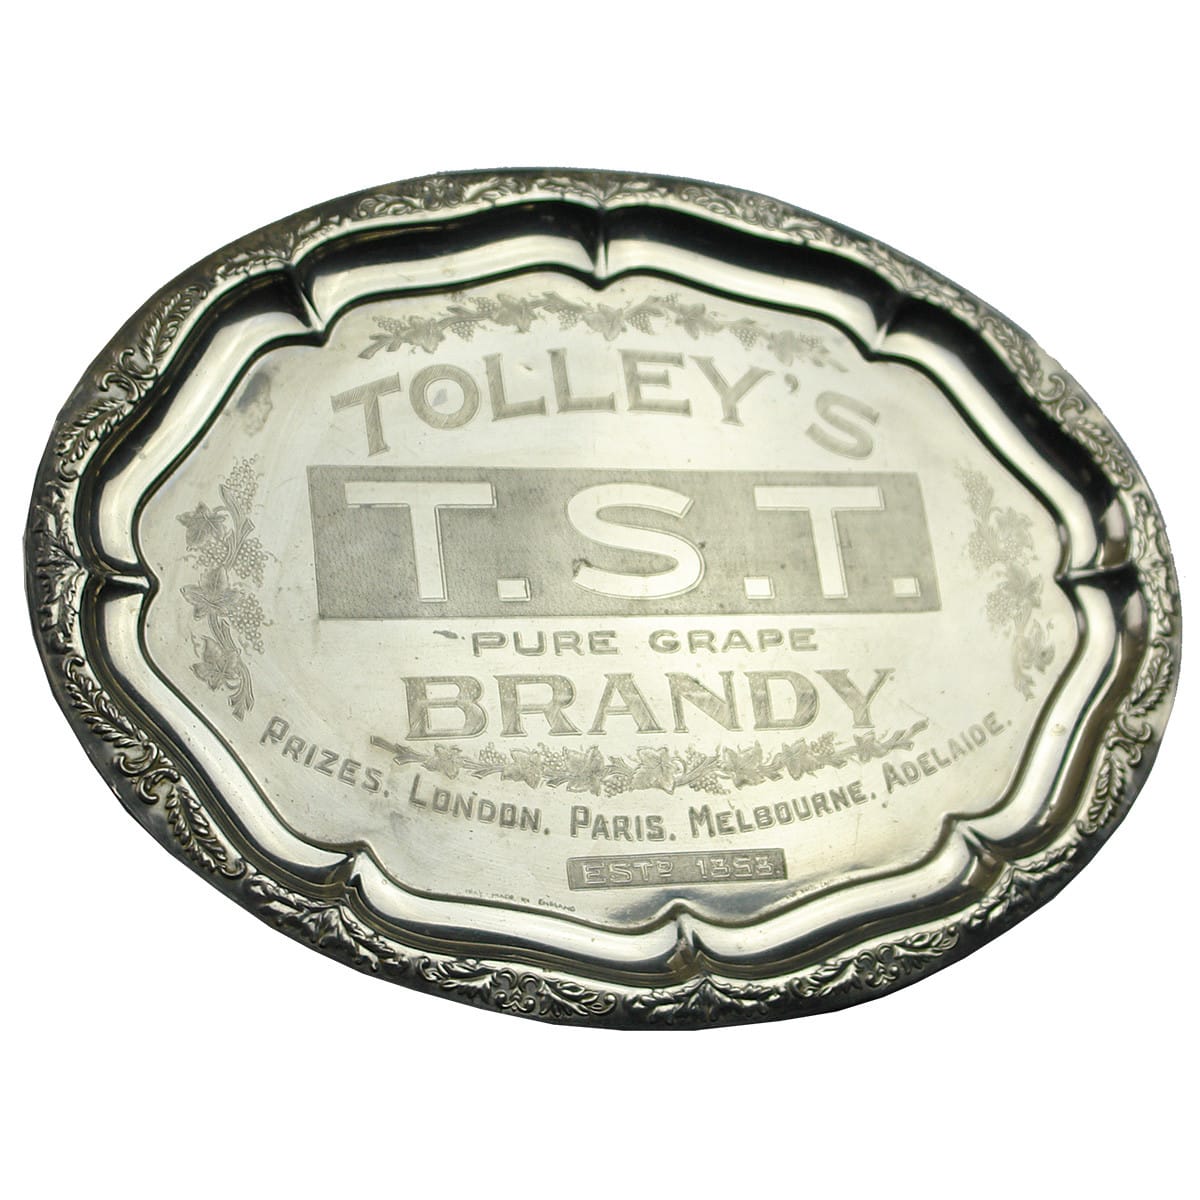 Spirits. Tolley's T. S. T. Pure Grape Brandy Advertising Tray. (South Australia)